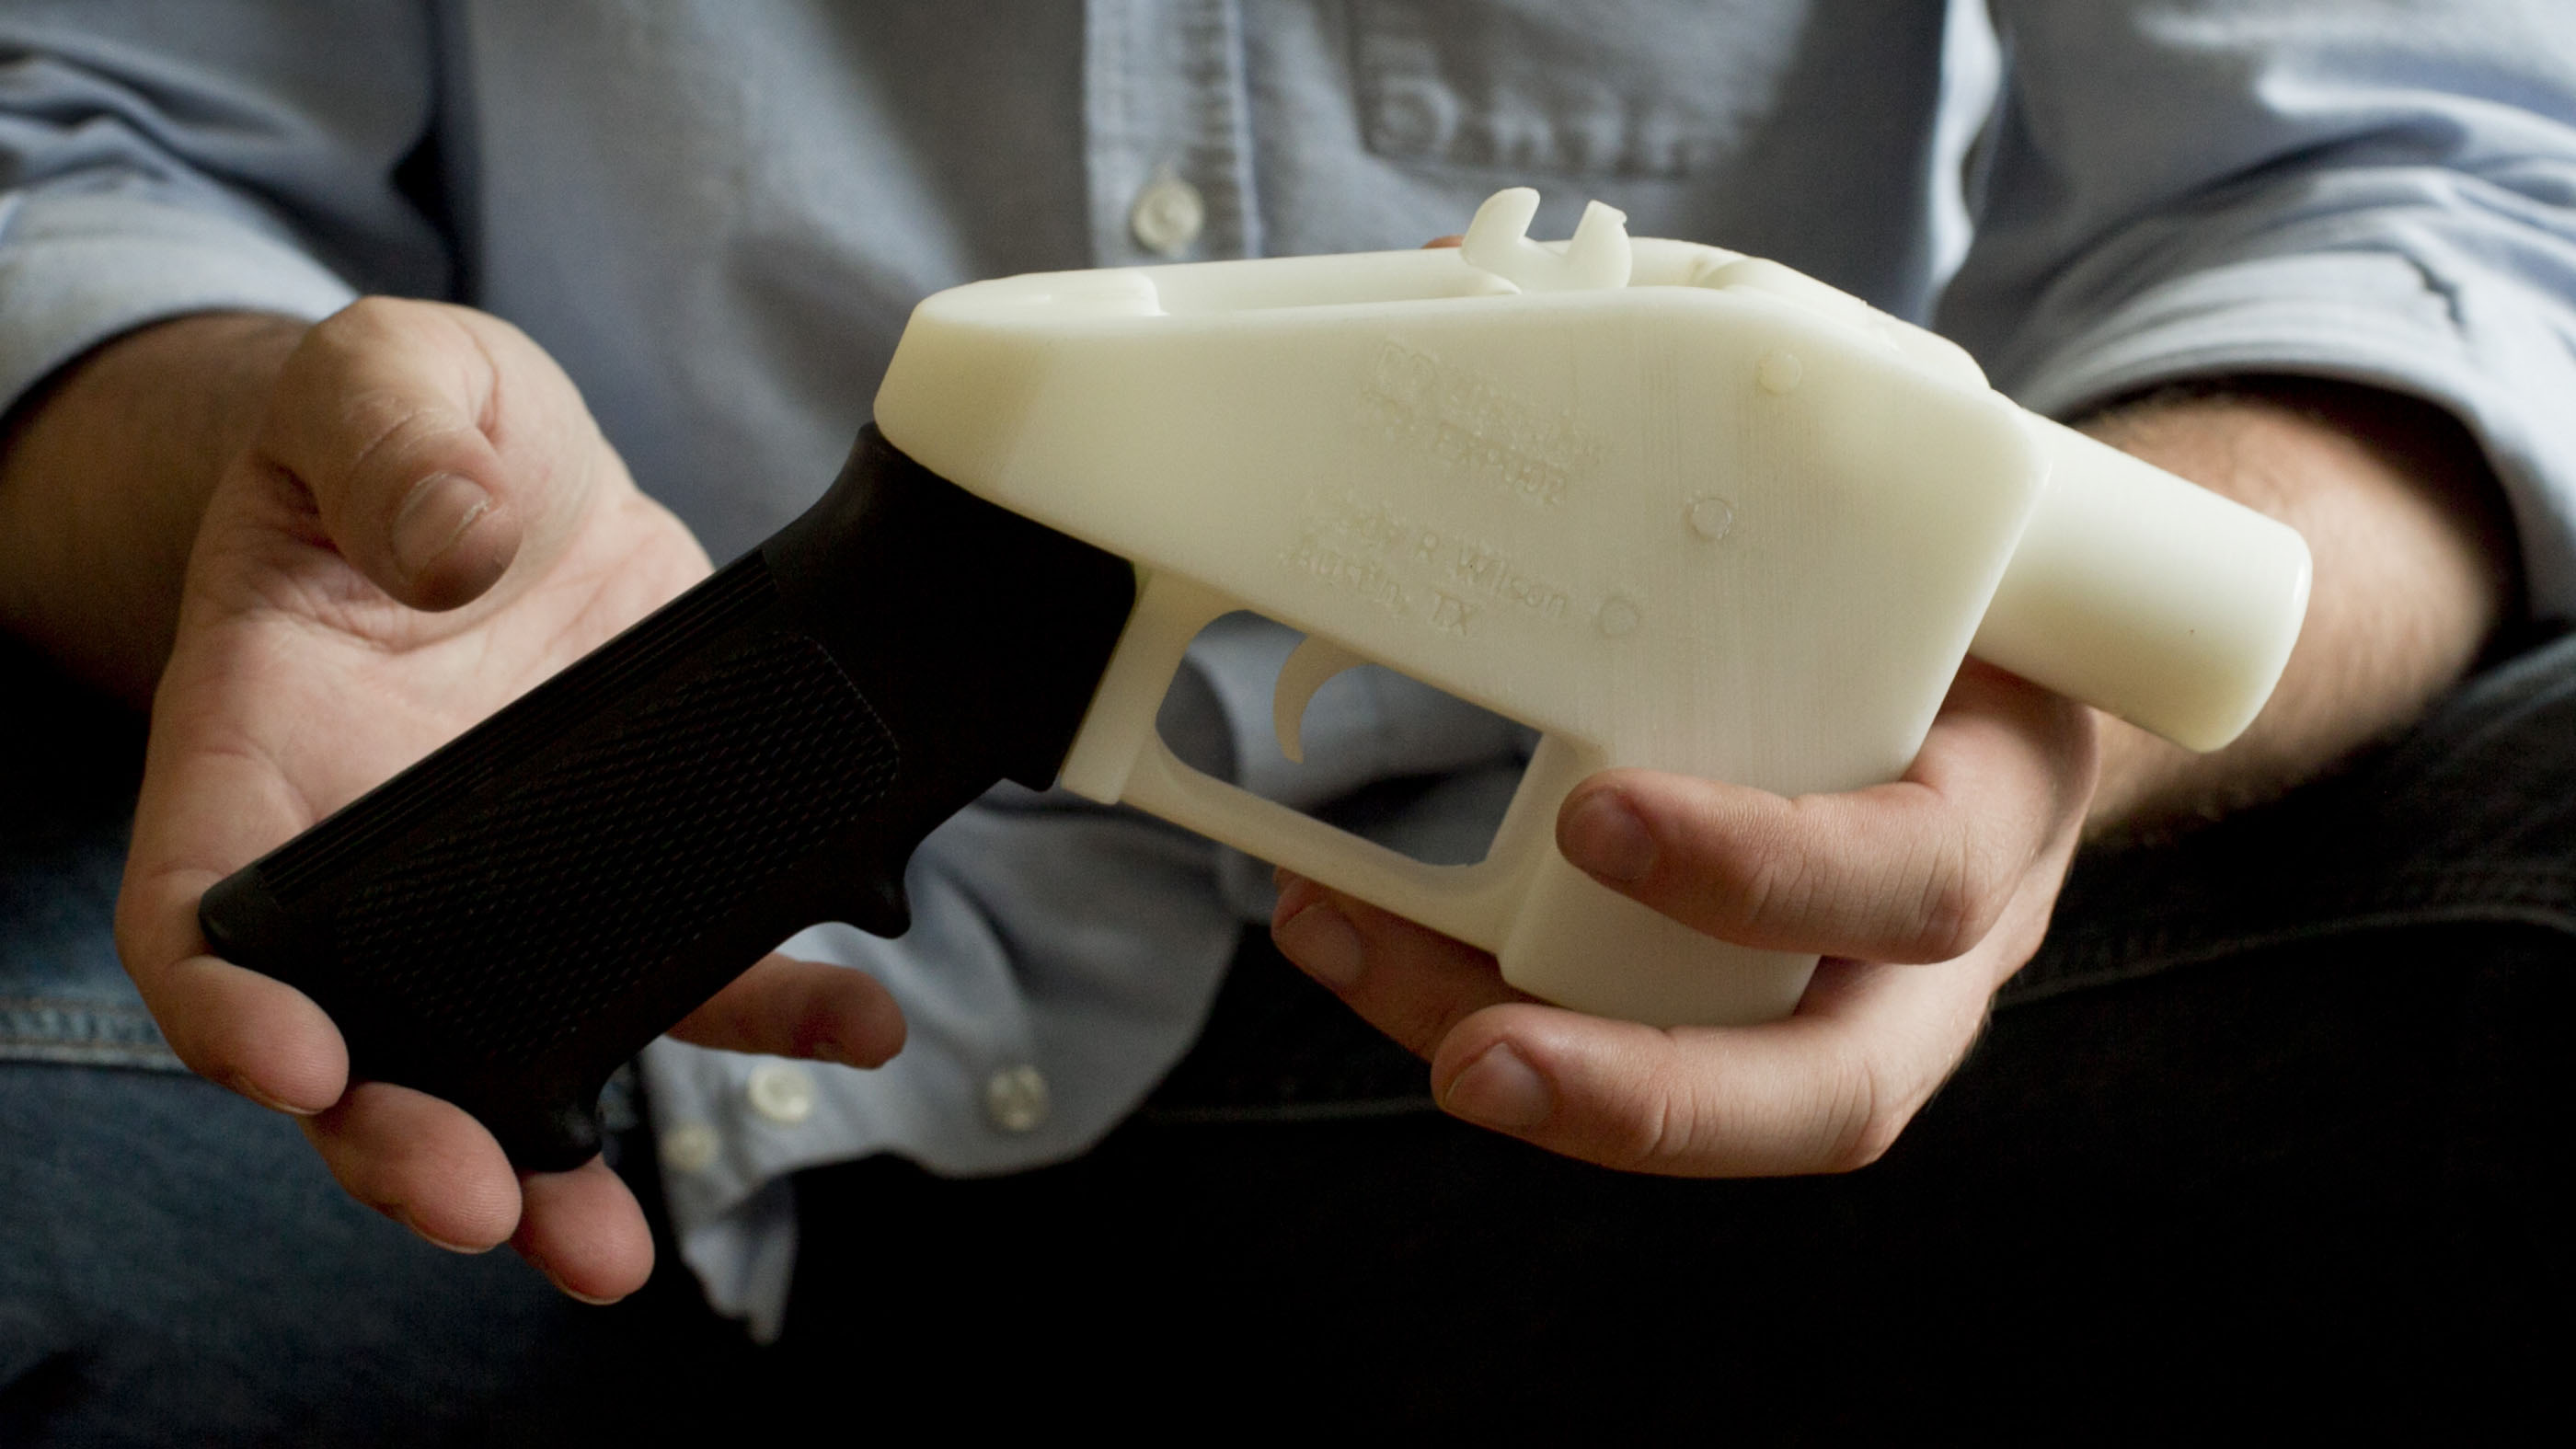 How Much of a Threat Are 3-D Printed Guns?